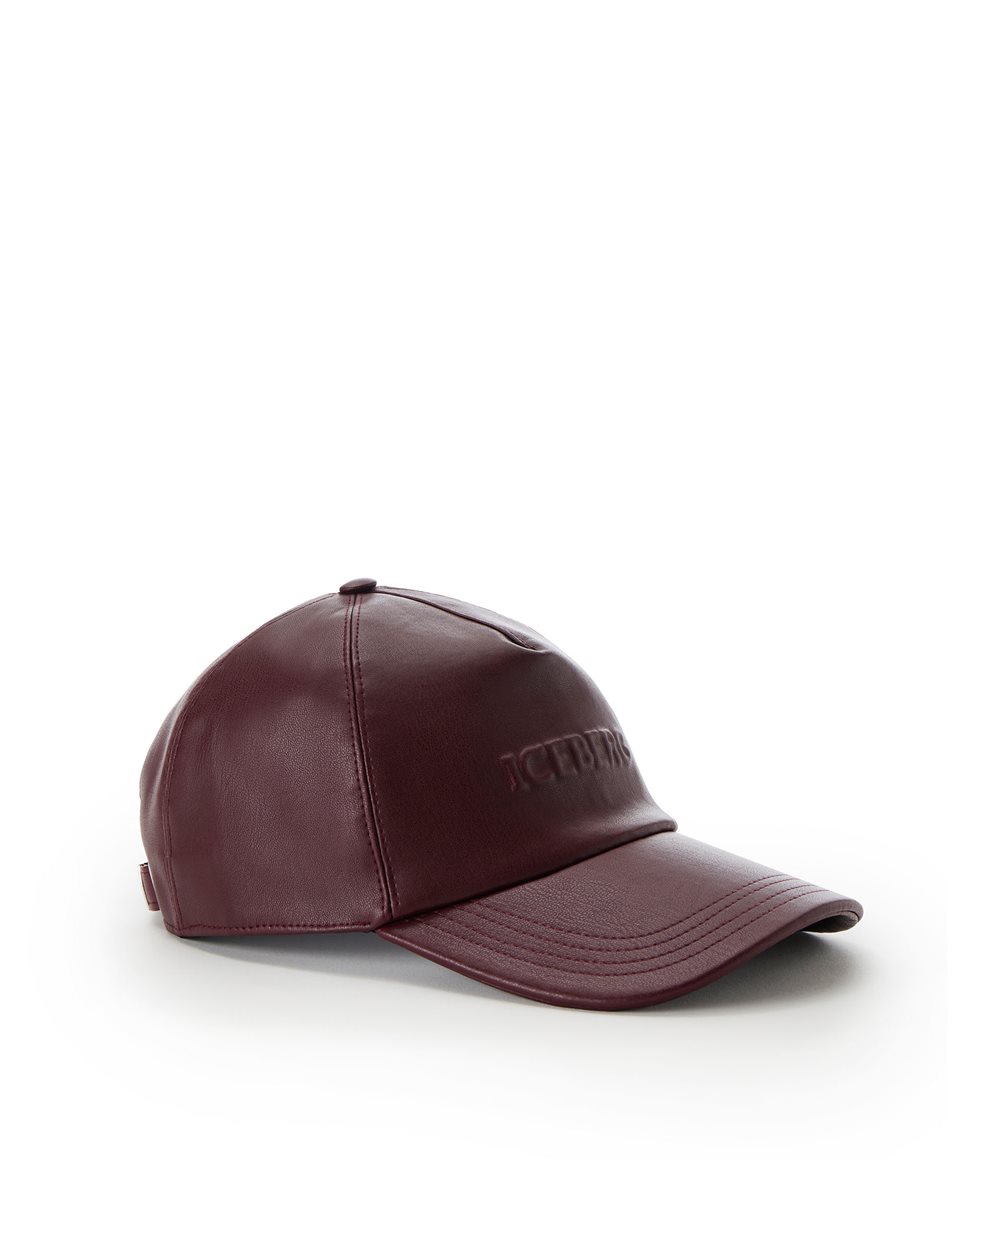 Baseball cap with logo - Shop by mood | Iceberg - Official Website